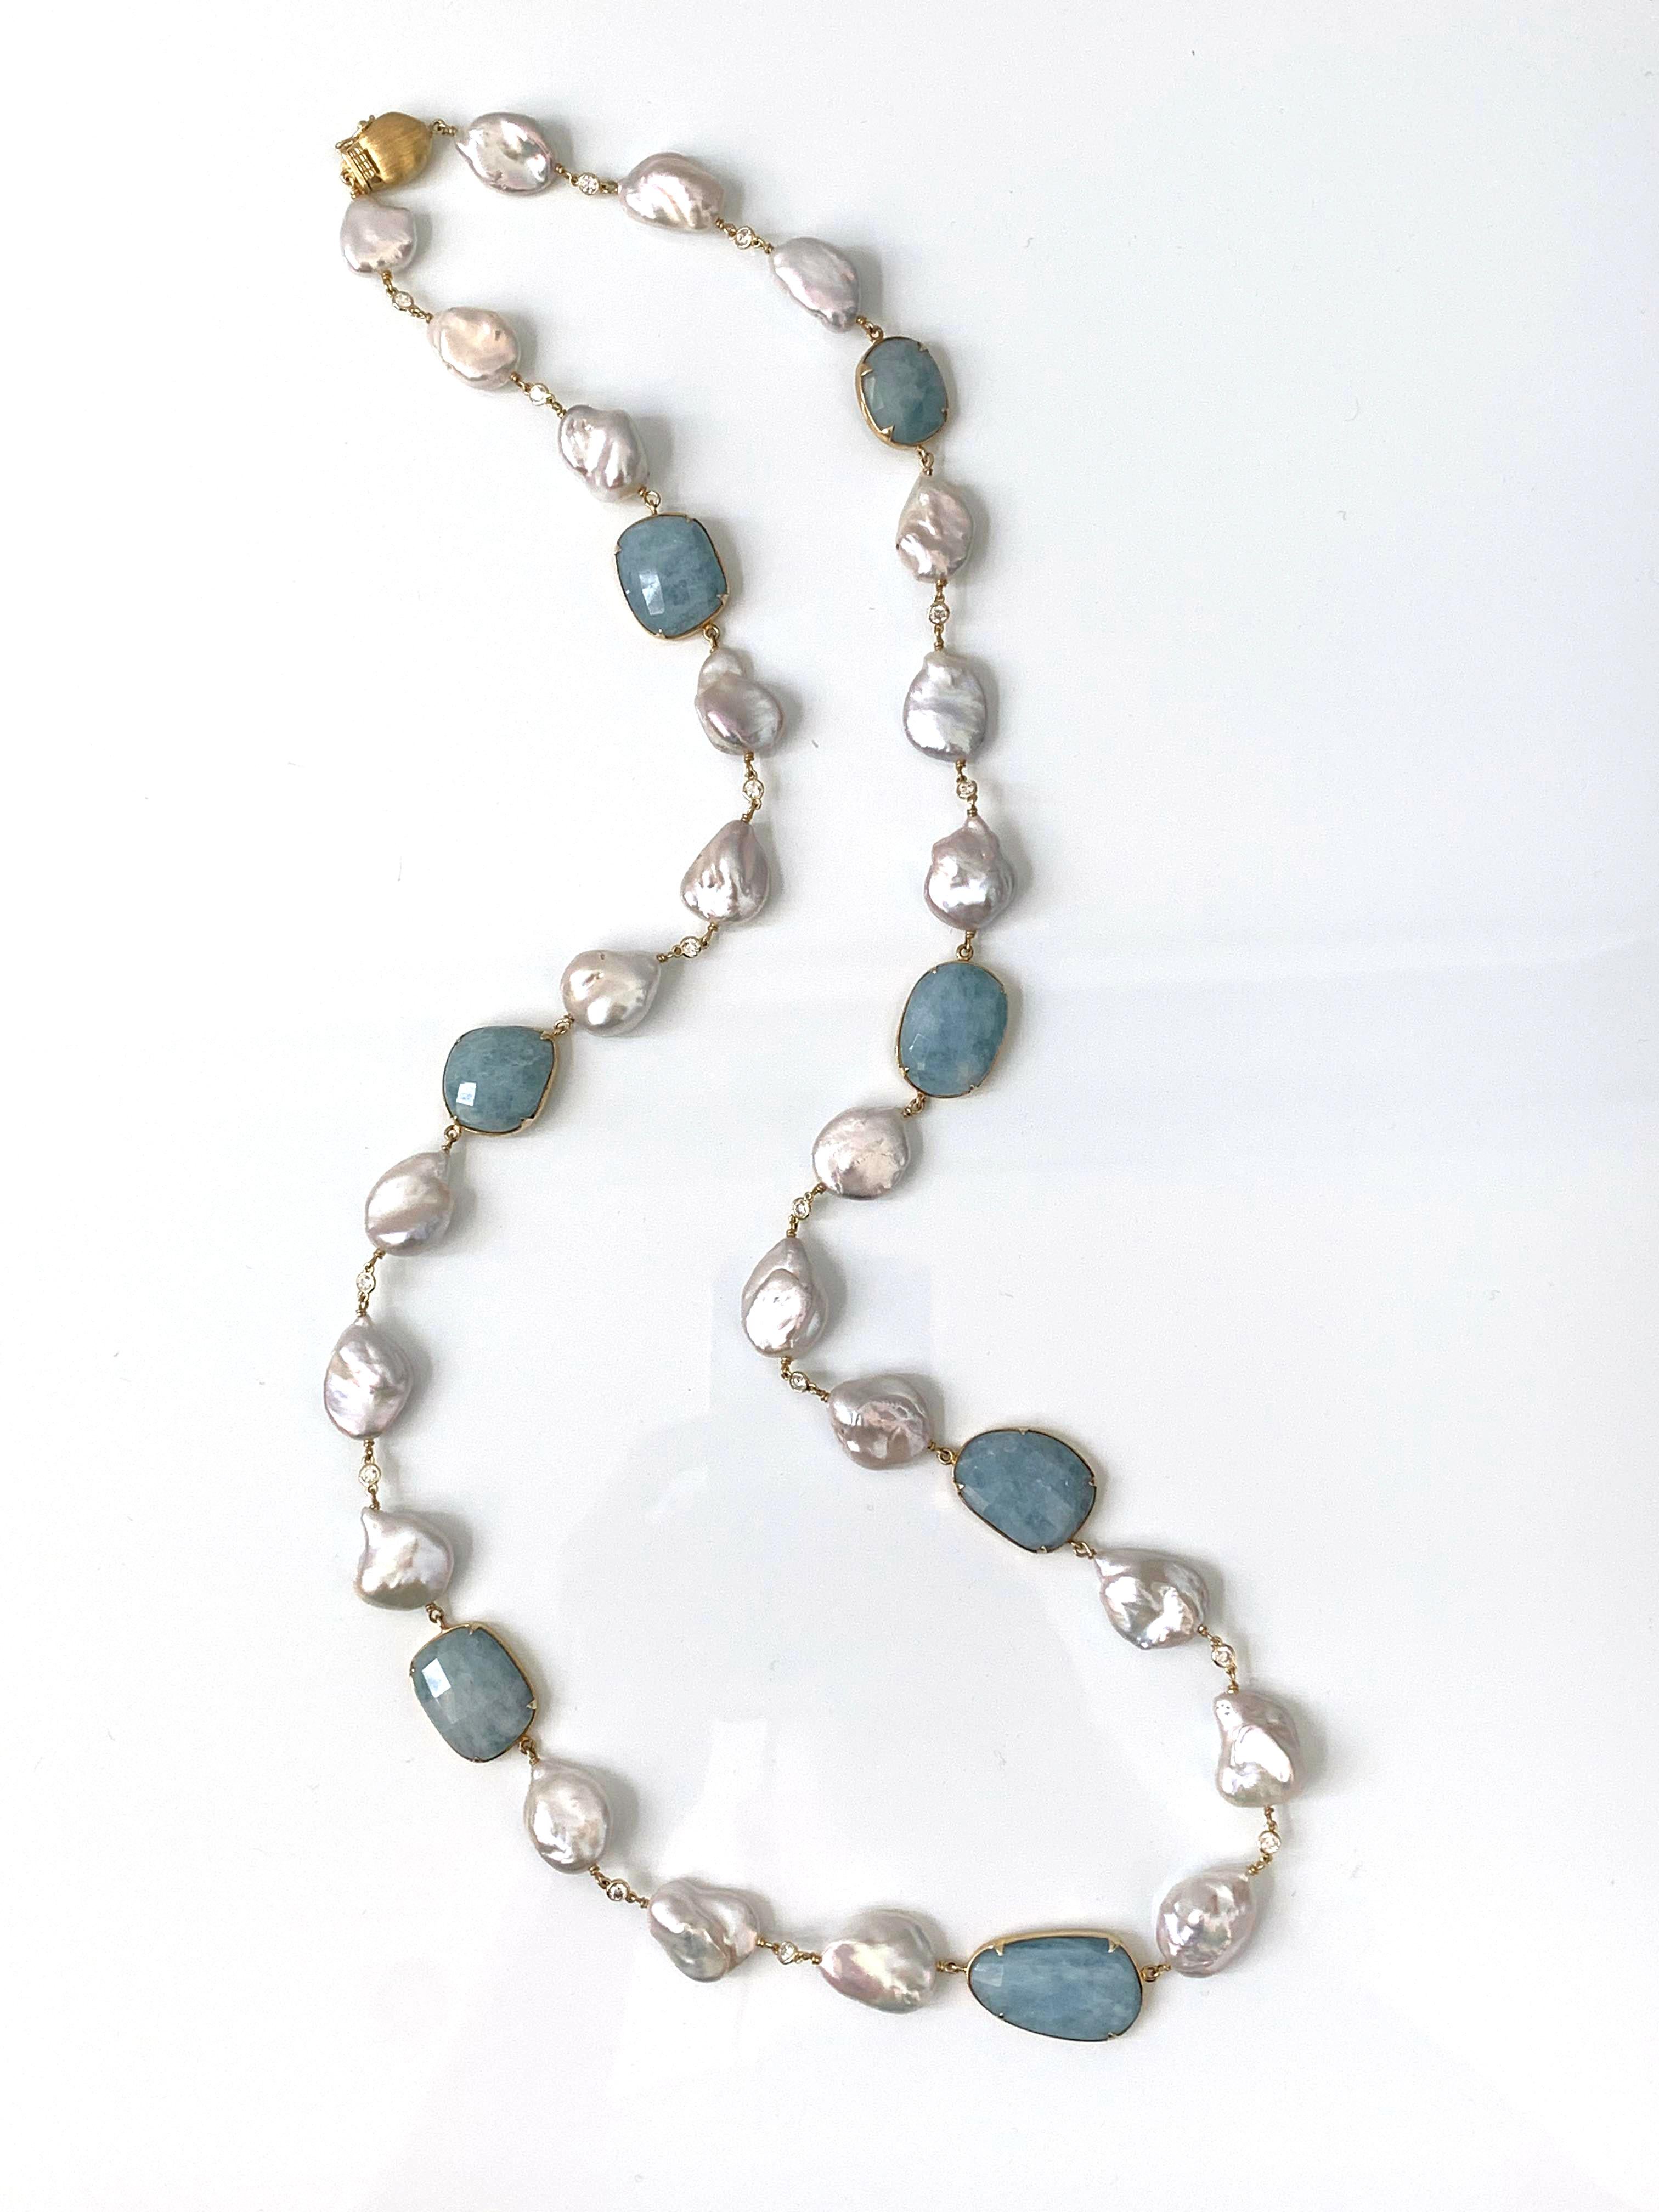 Beautiful Aquamarine and Fresh Water Baroque Pearl Necklace. 

The necklace features 7 unique fancy-shape milky aquamarines and 24 high-luster 15-18mm freshwater 